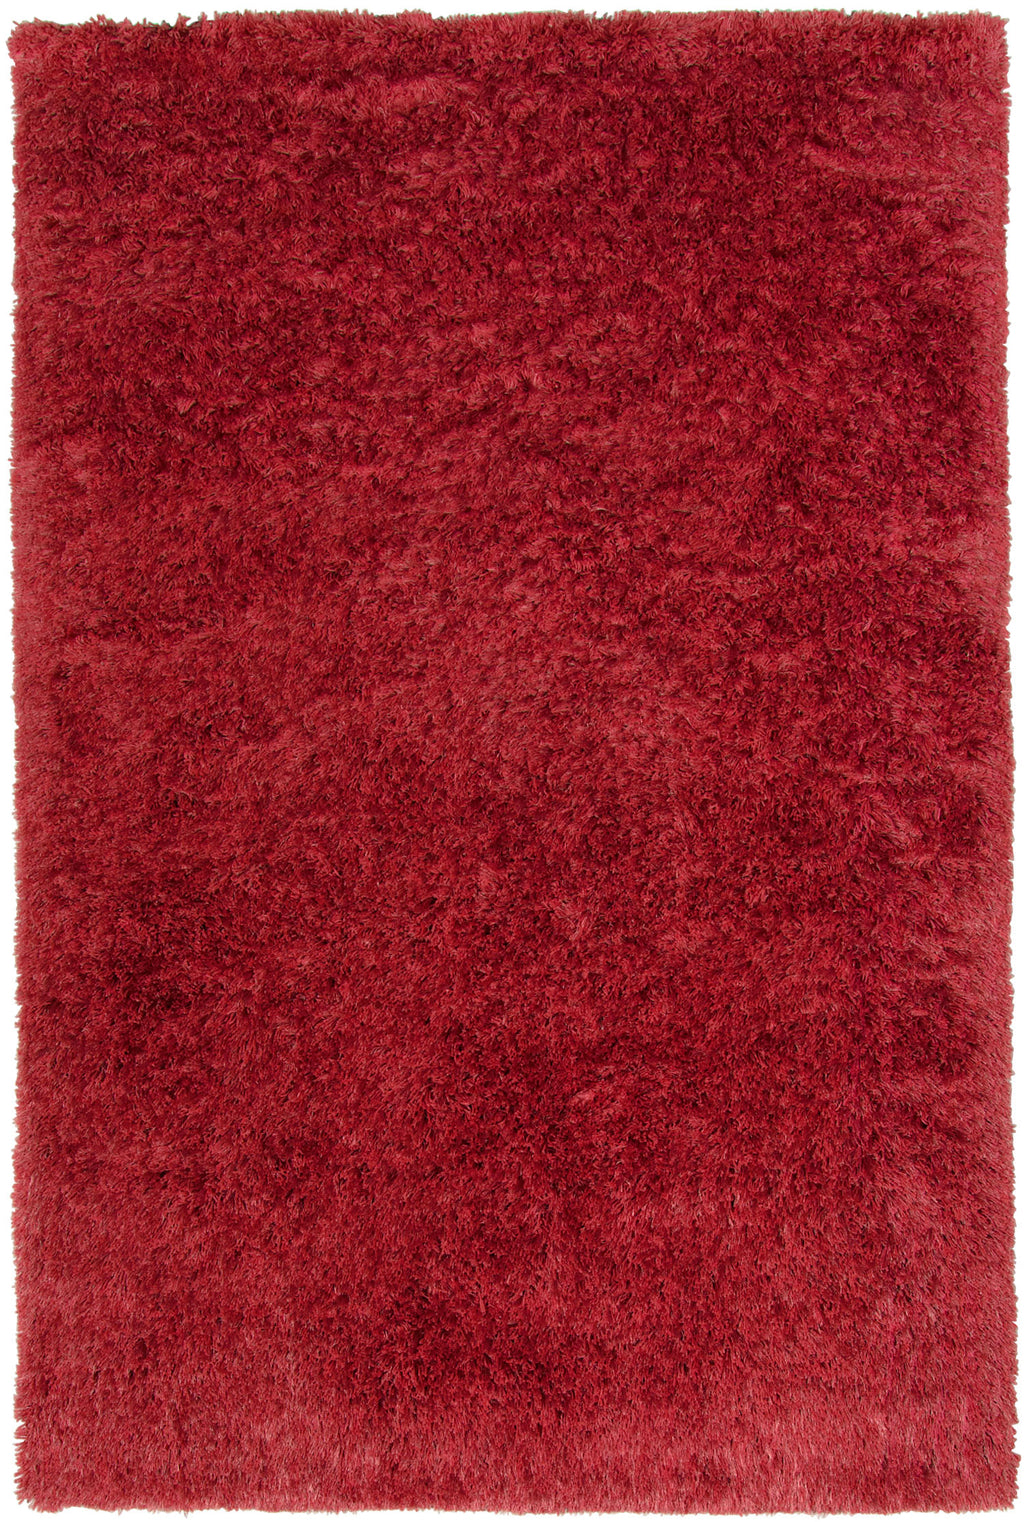 Capel Trolley Line 3250 Hot Pepper 550 Area Rug main image